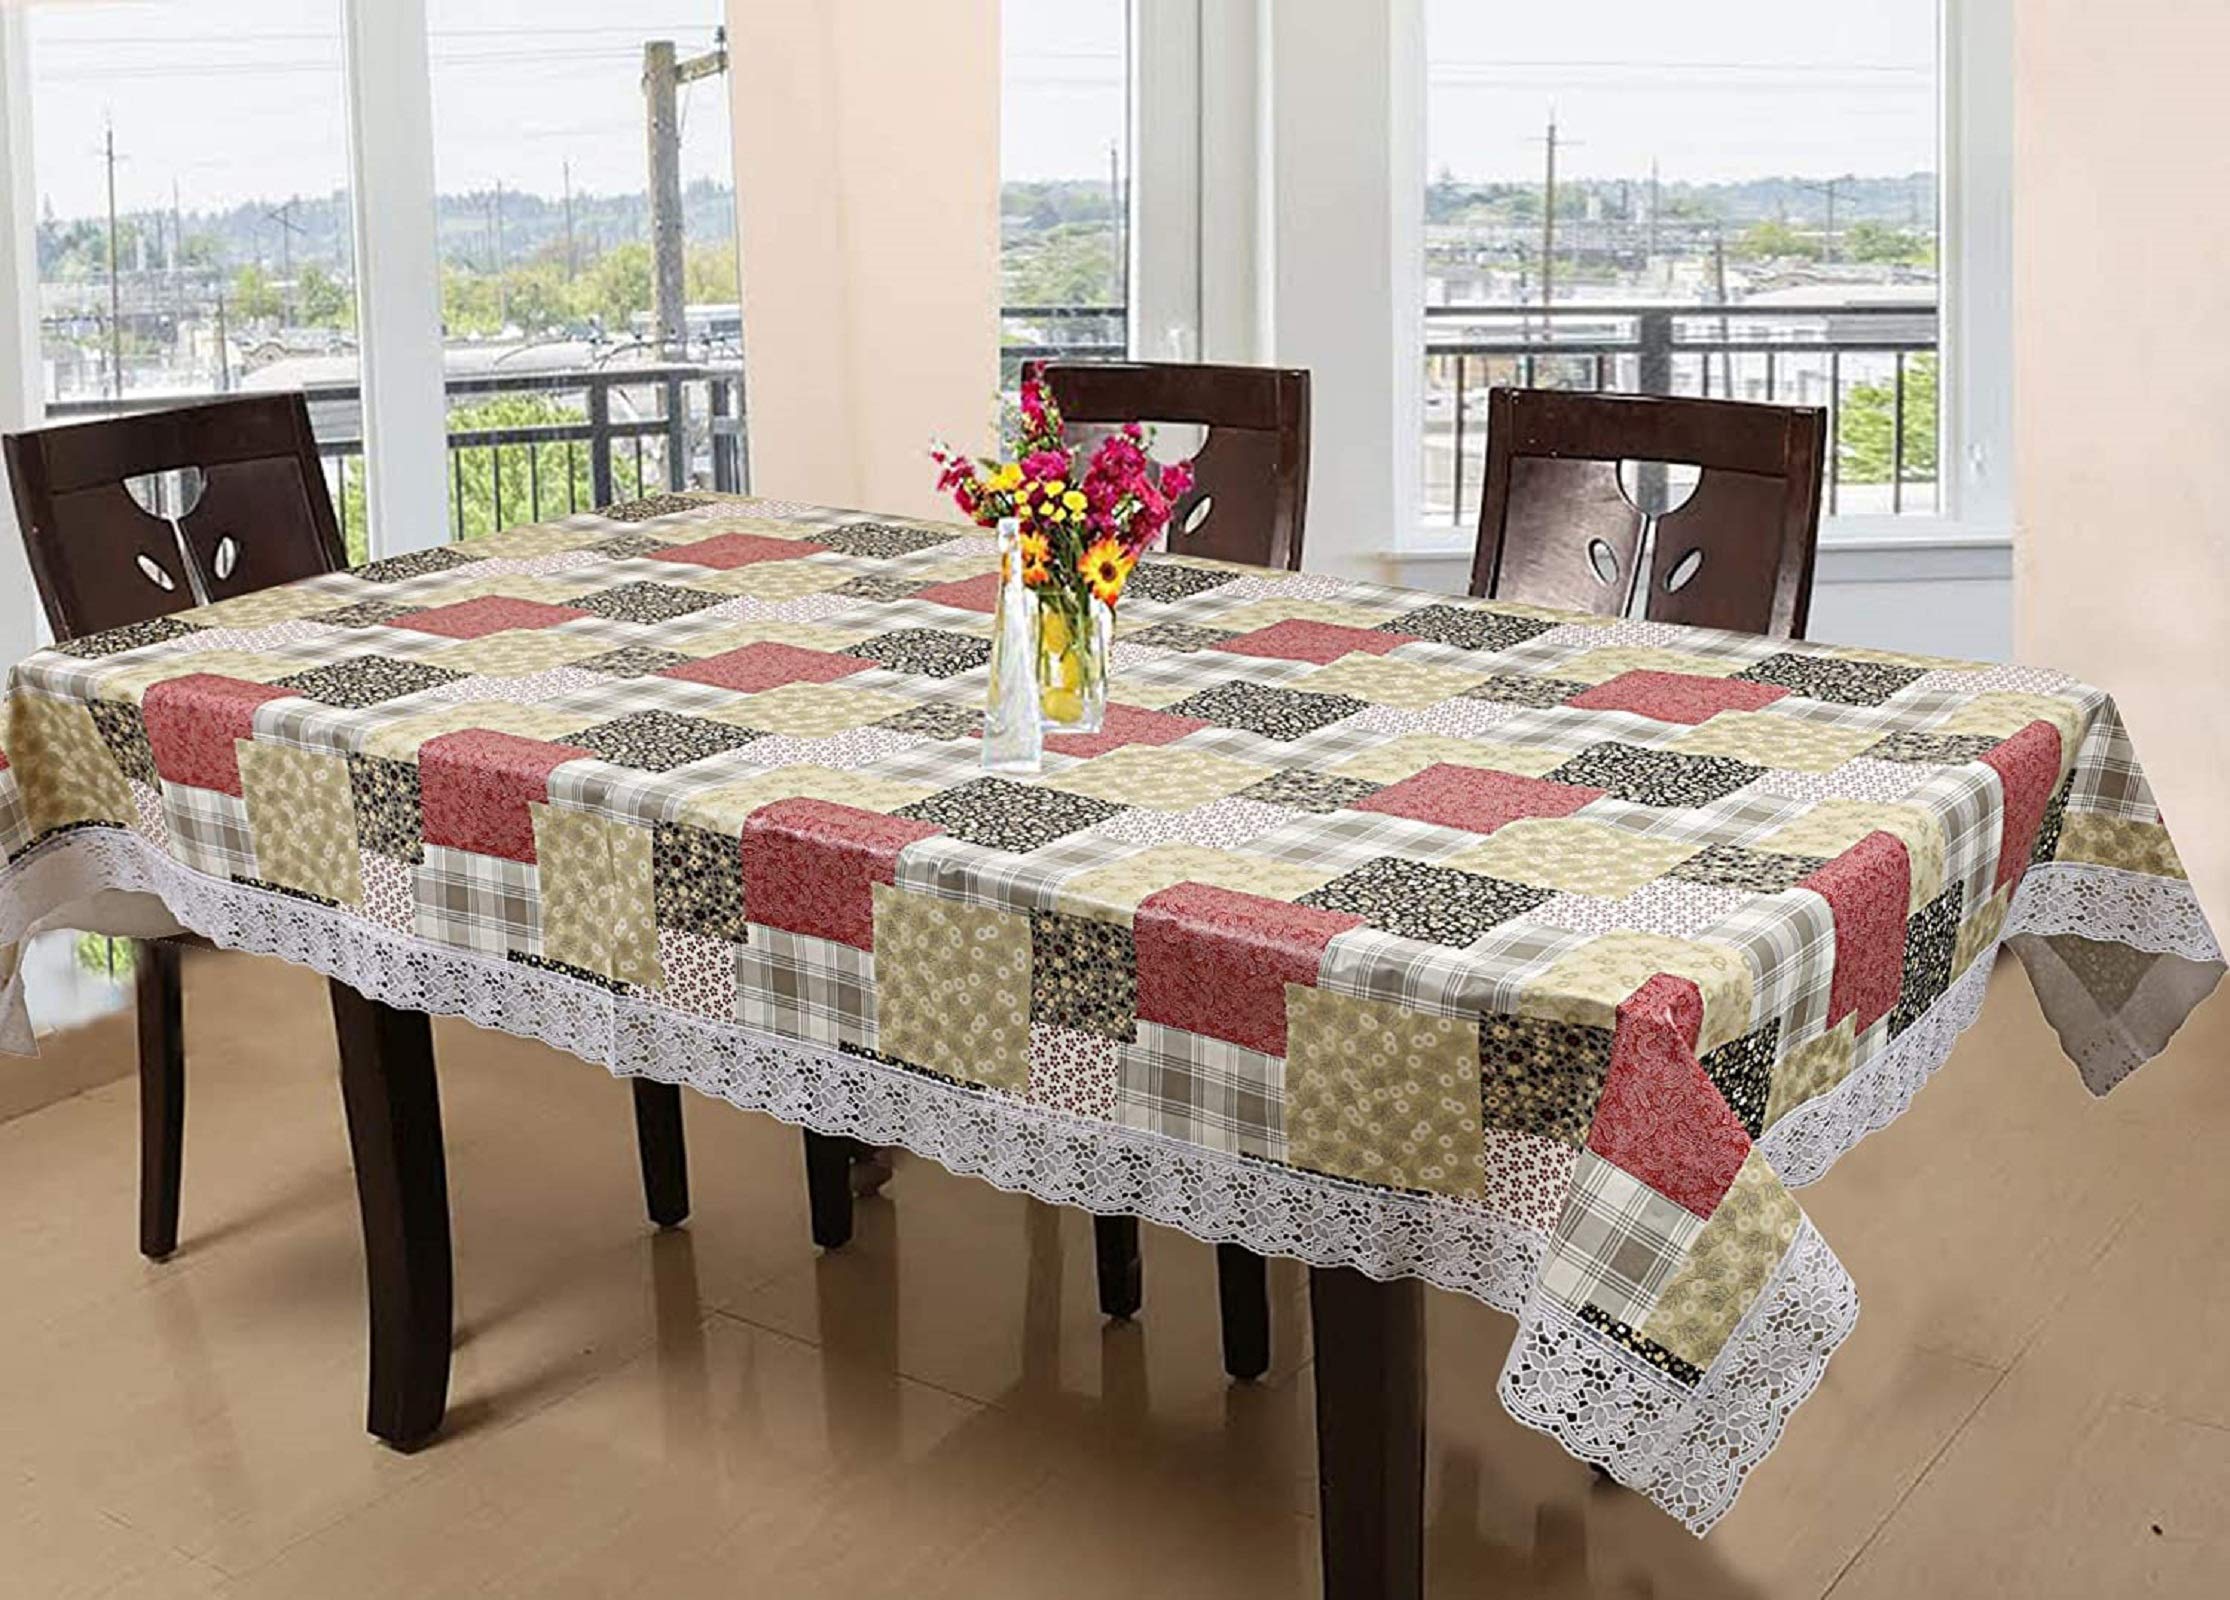 Kuber Industries PVC 6 Seater Dining Table Cover (Cream) -CTKTC8648